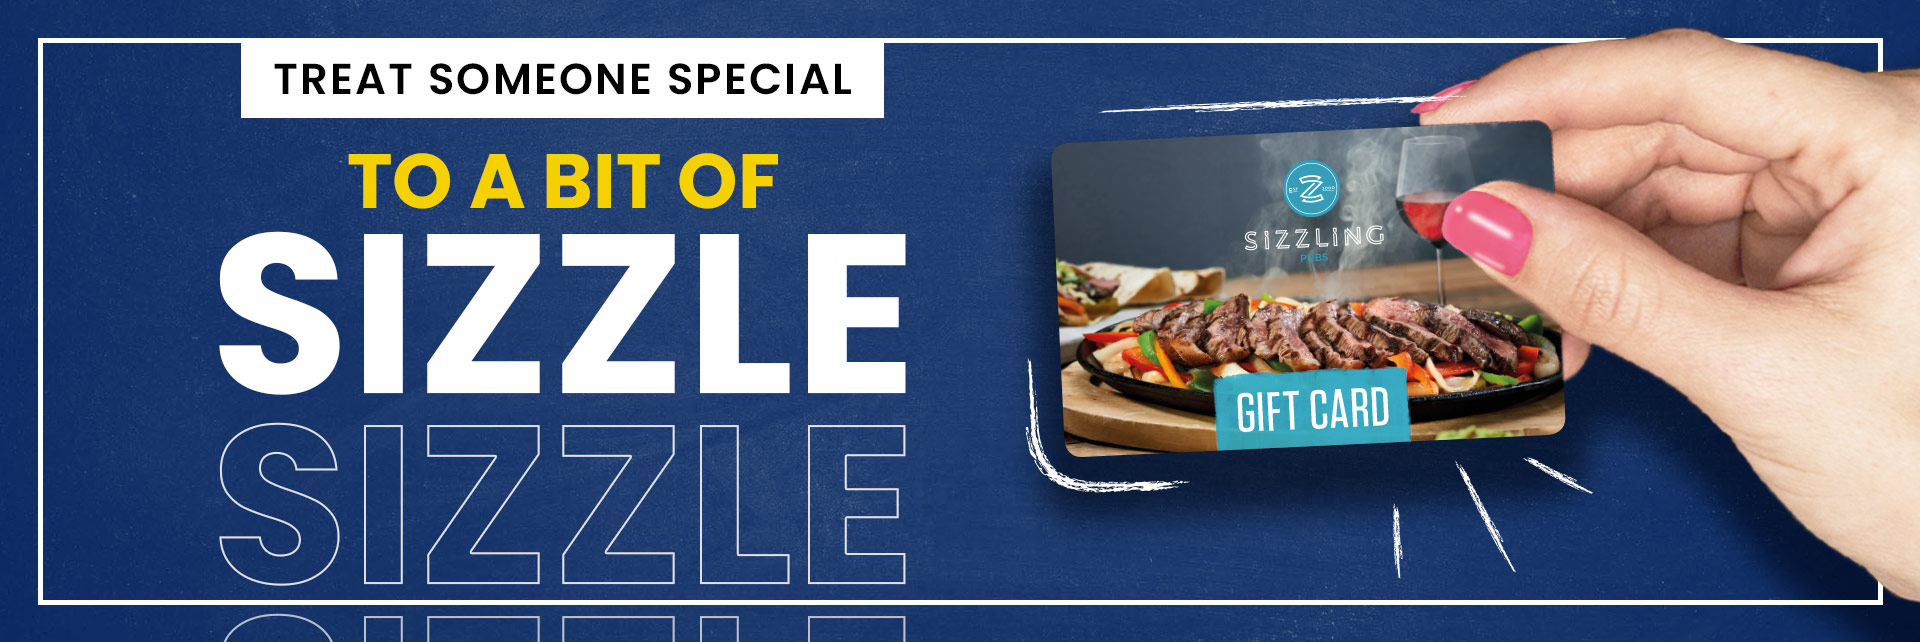 Sizzling Pubs Gift Card at The White House in Walsall